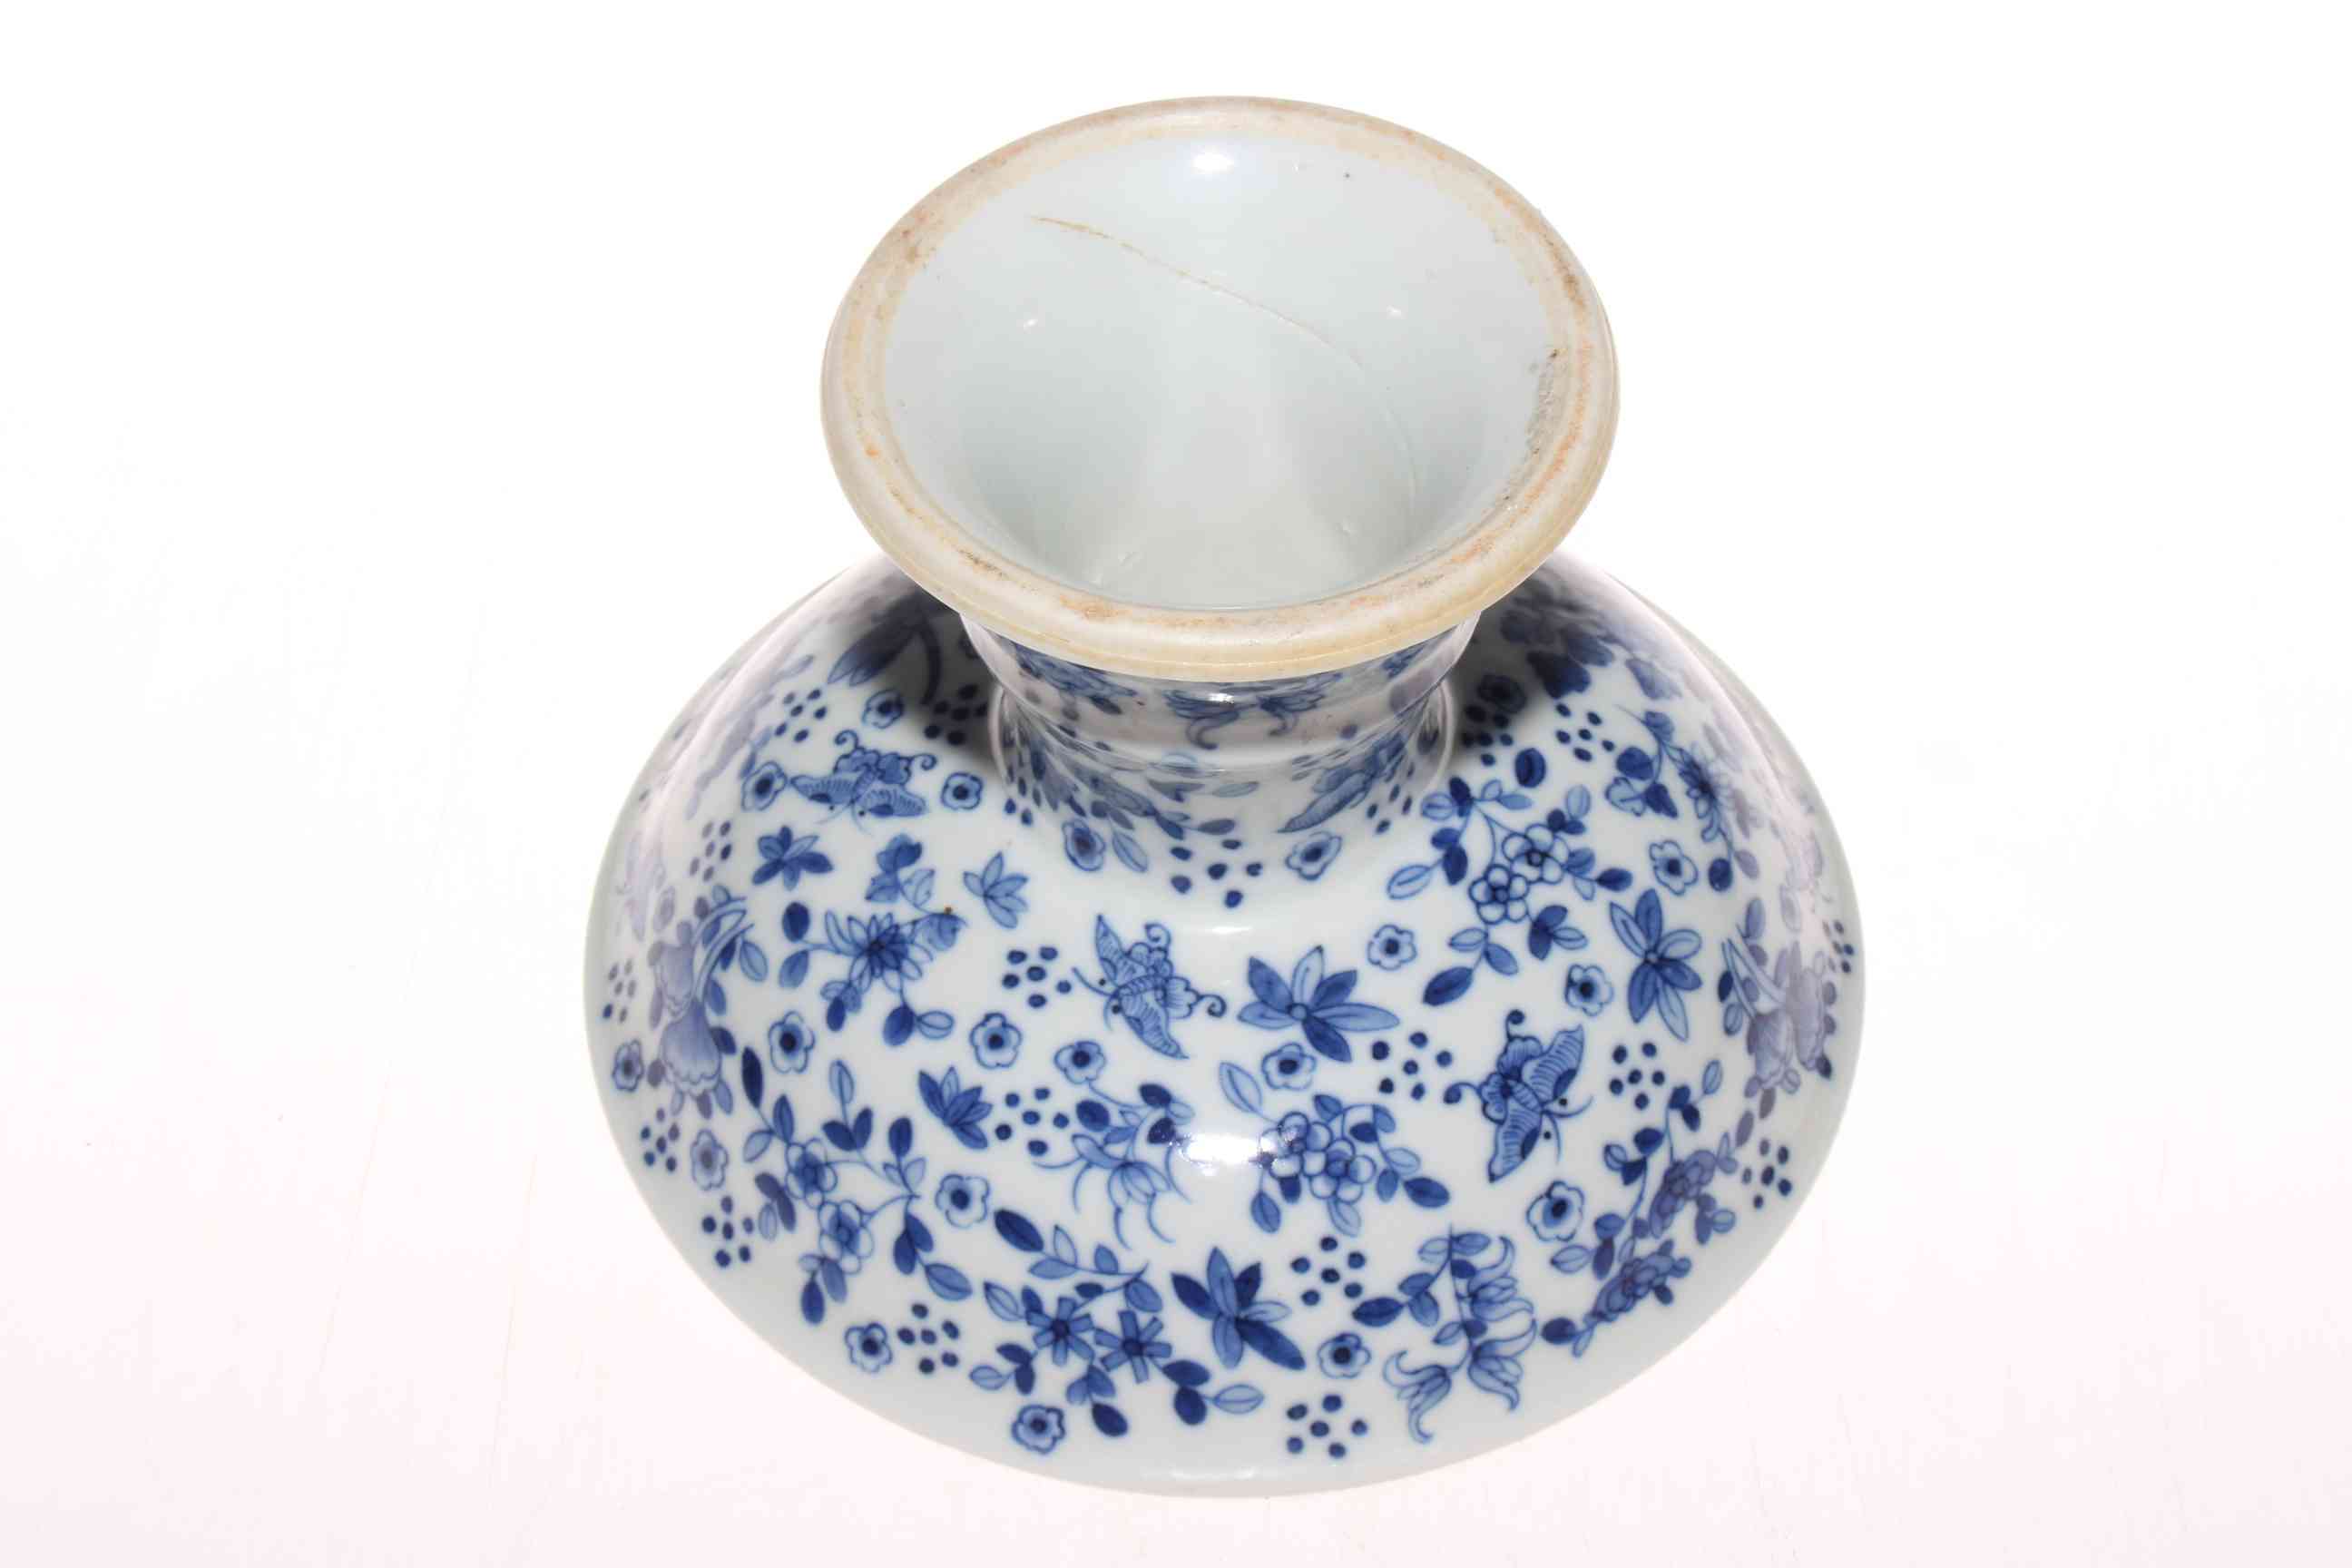 Chinese blue and white tazza with insert and foliage decoration, 14cm high. - Image 3 of 3